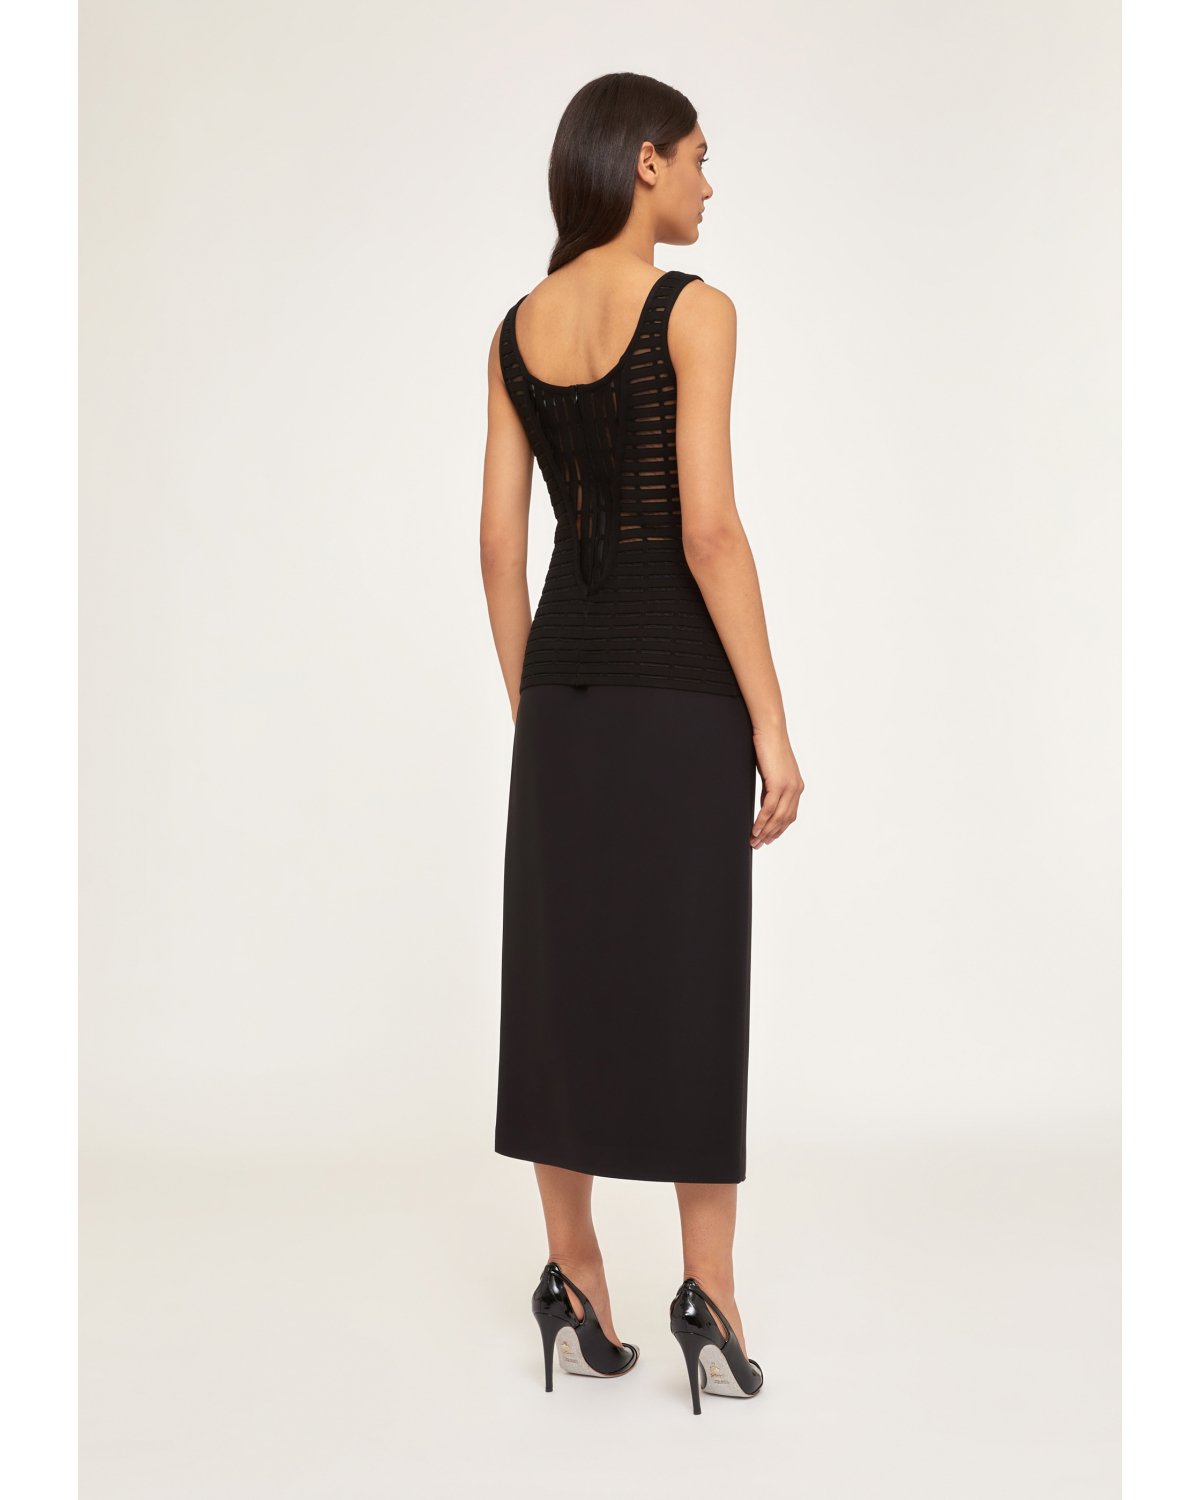 Gonna nera midi in cady stretch | Party Collection | Genny